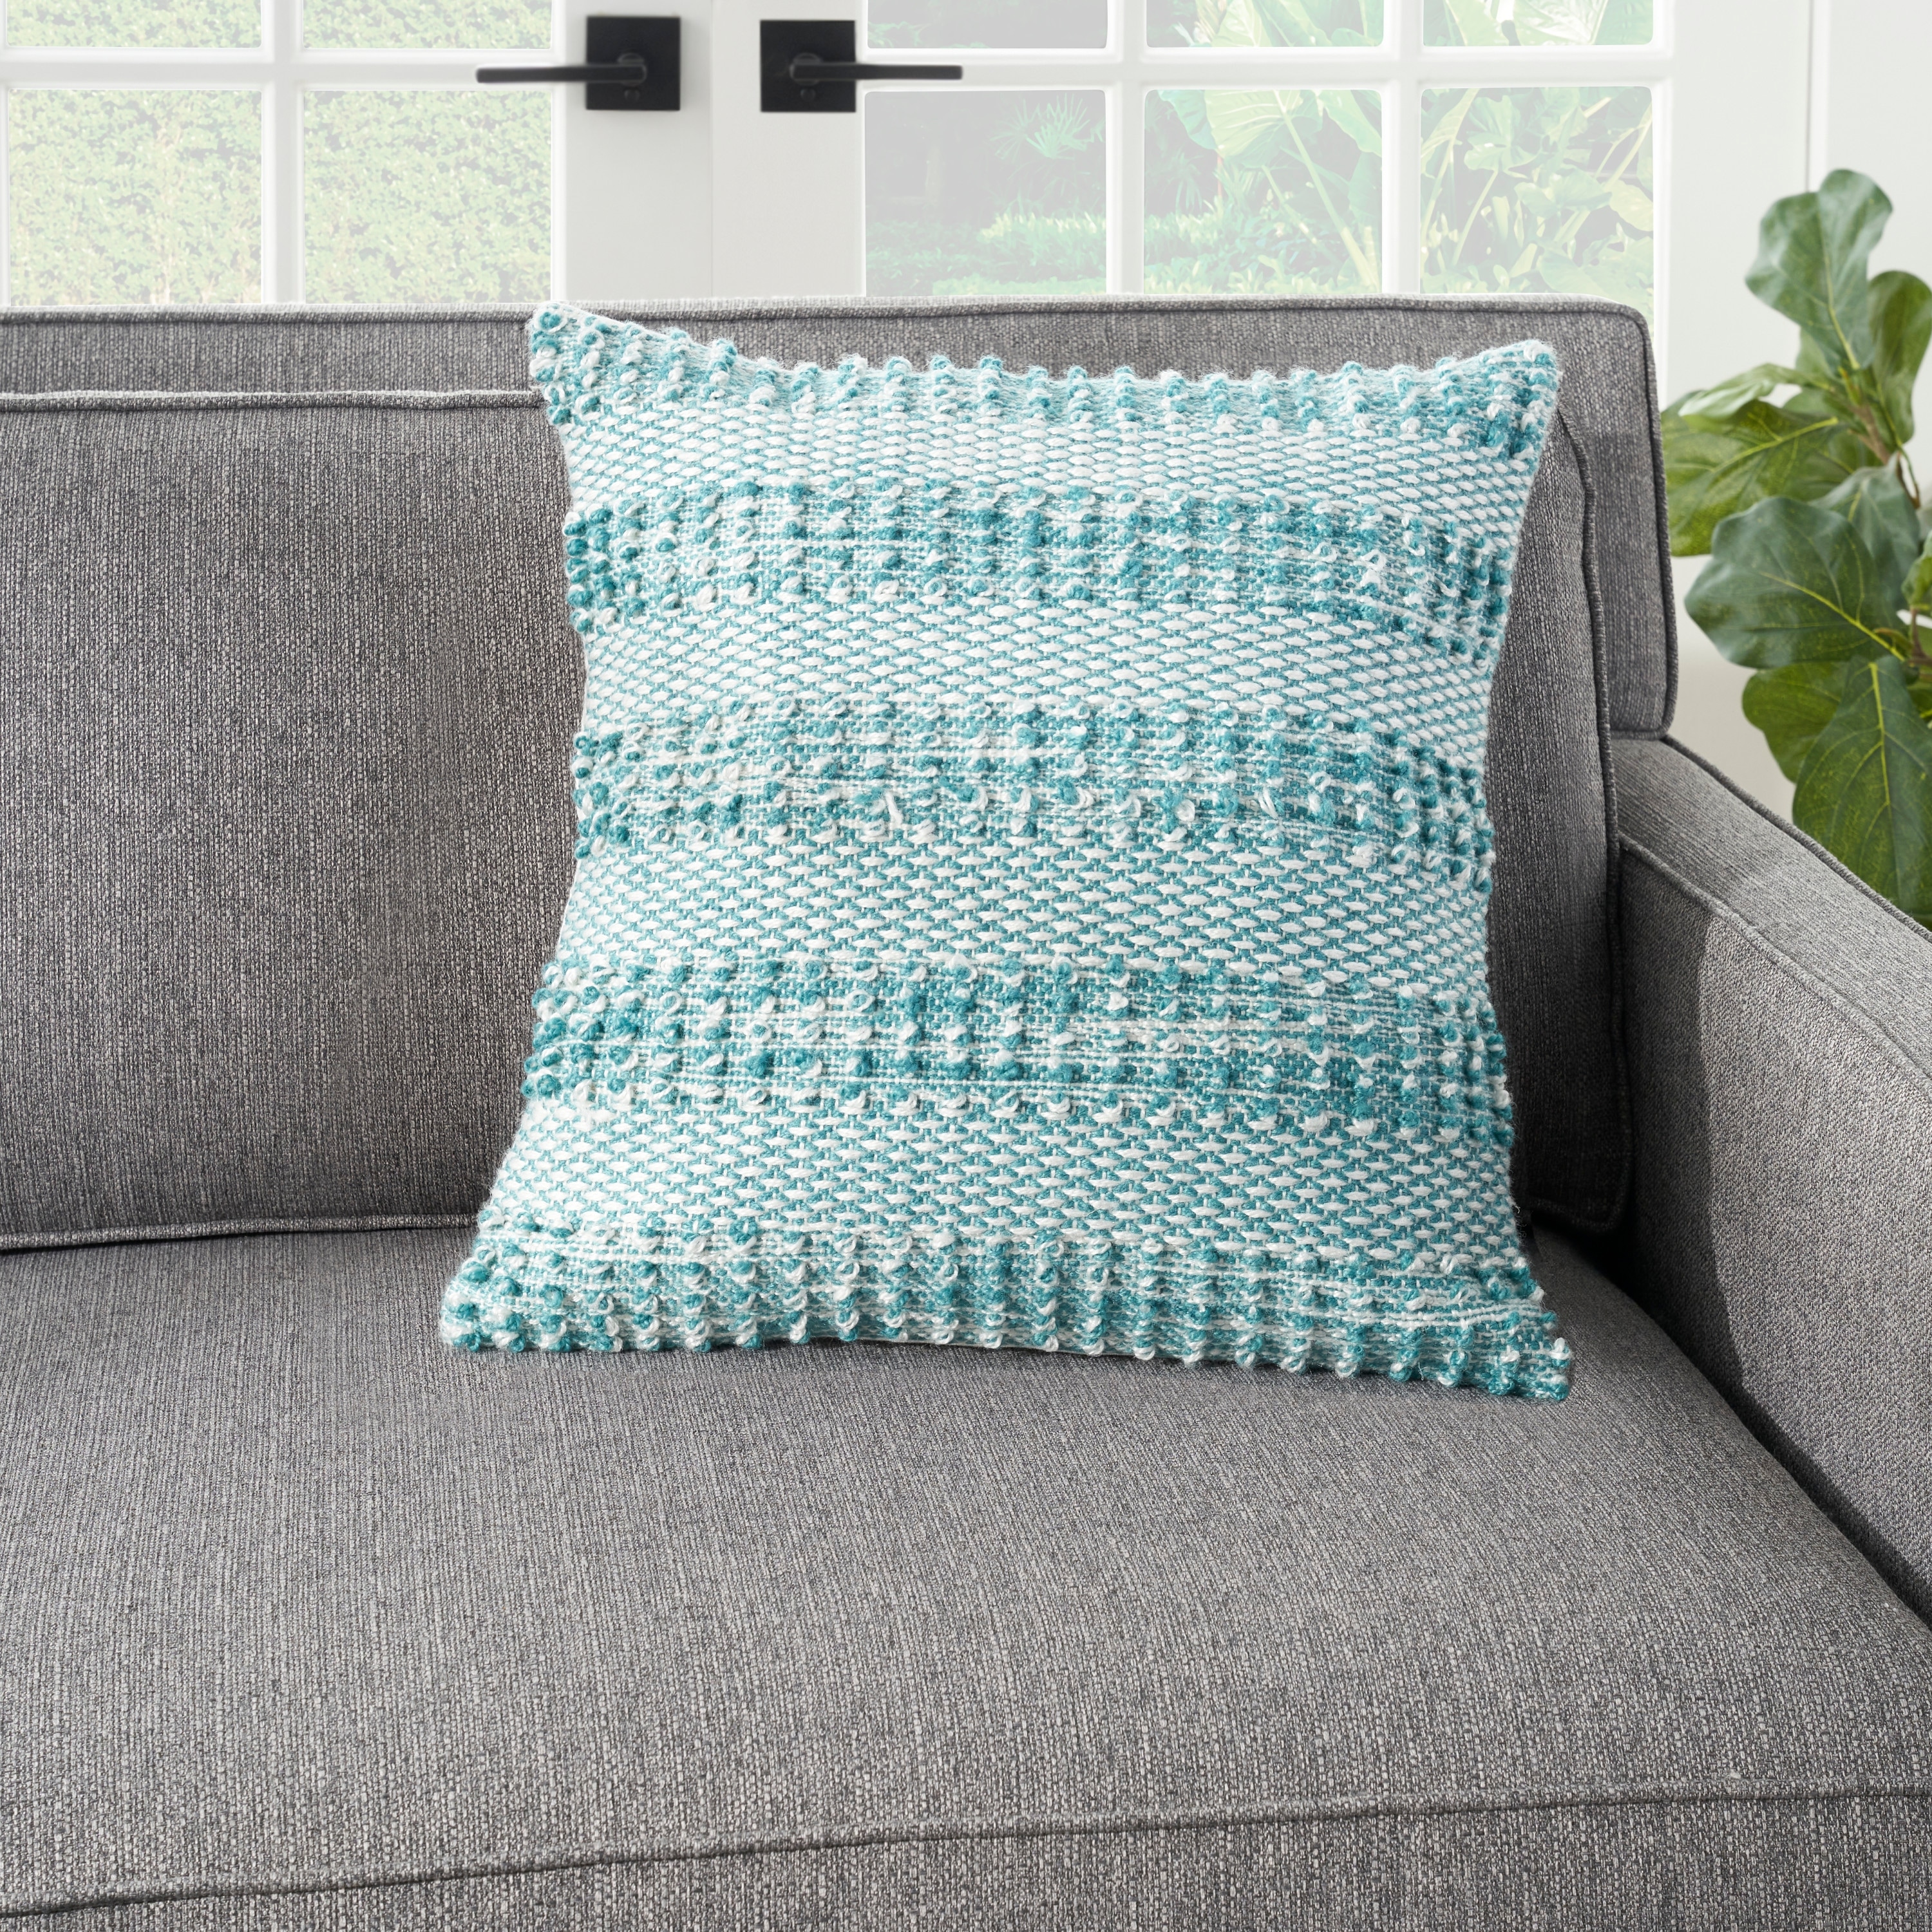 Mina Victory Outdoor Pillows Woven Stripes and Dots Textured Throw Pillow , ( 18"X18" )